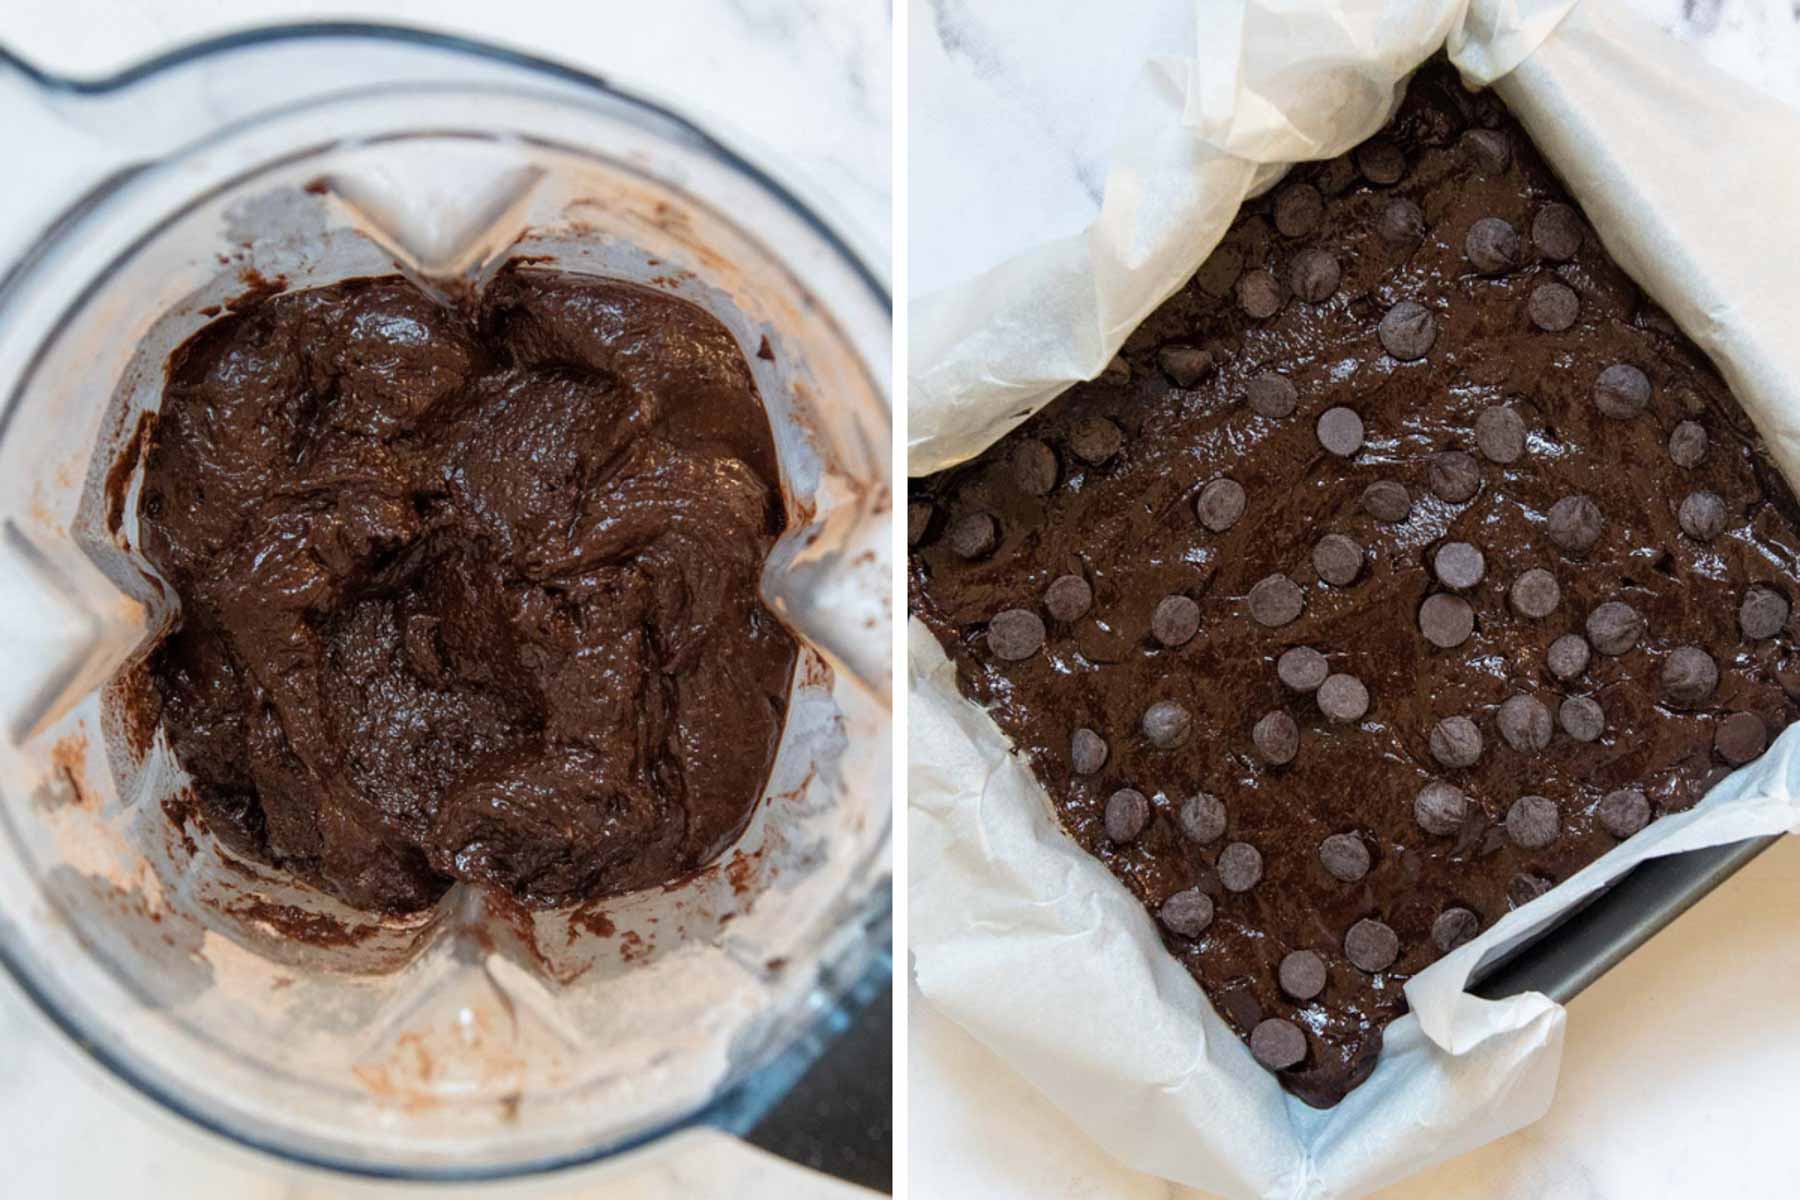 images showing the brownie batter in a blender and in a baking pan